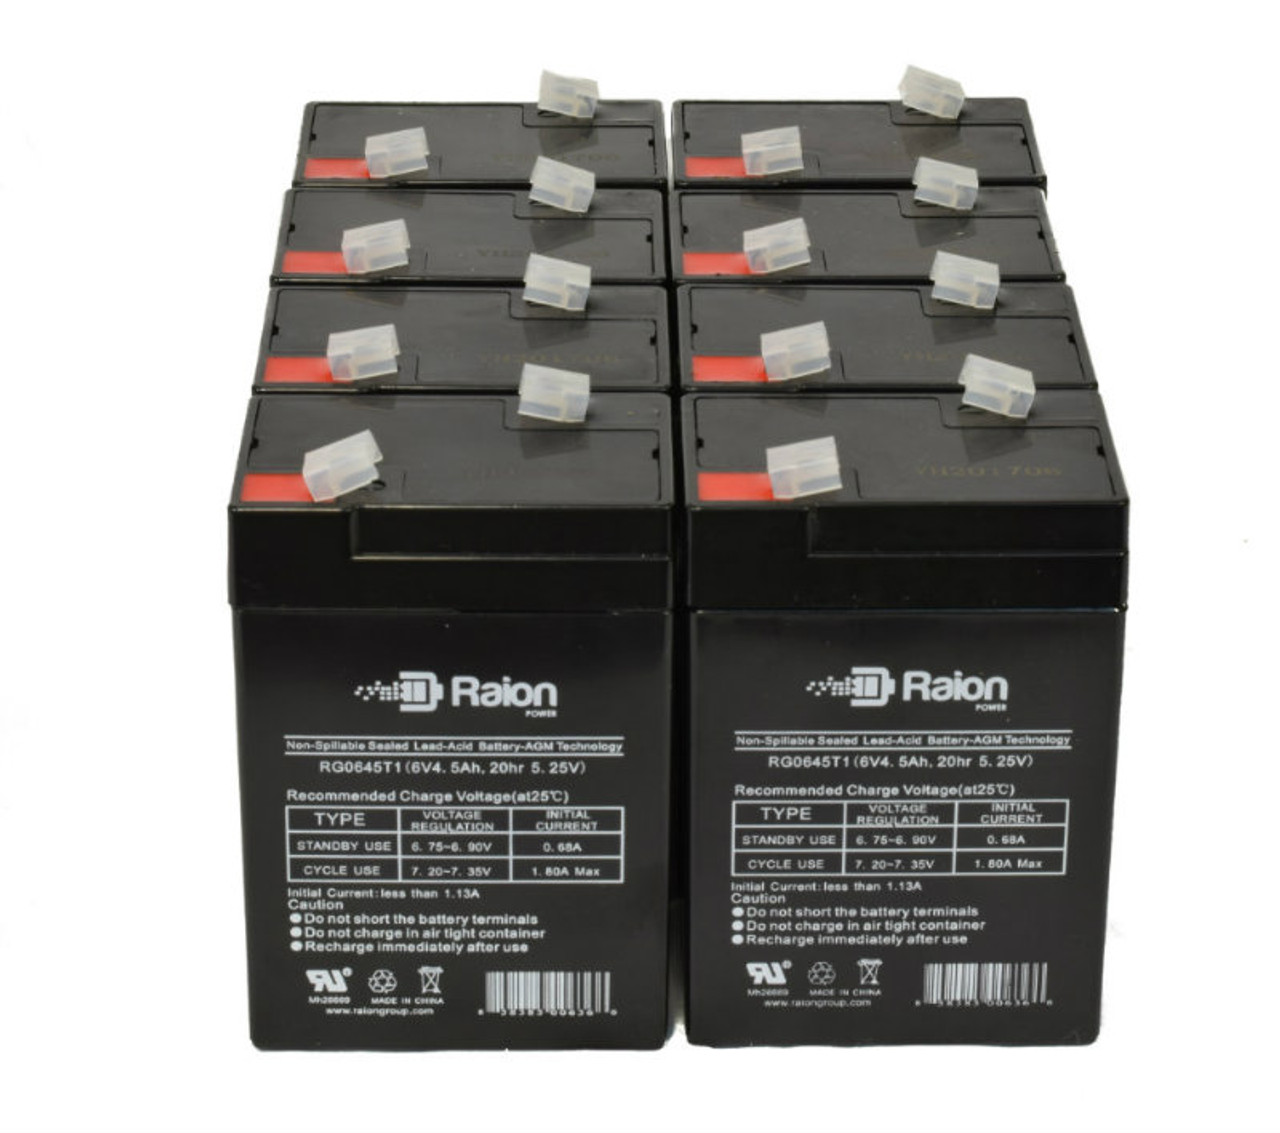 Raion Power 6 Volt 4.5Ah RG0645T1 Replacement Battery for VCELL 6VC4.5 - 8 Pack